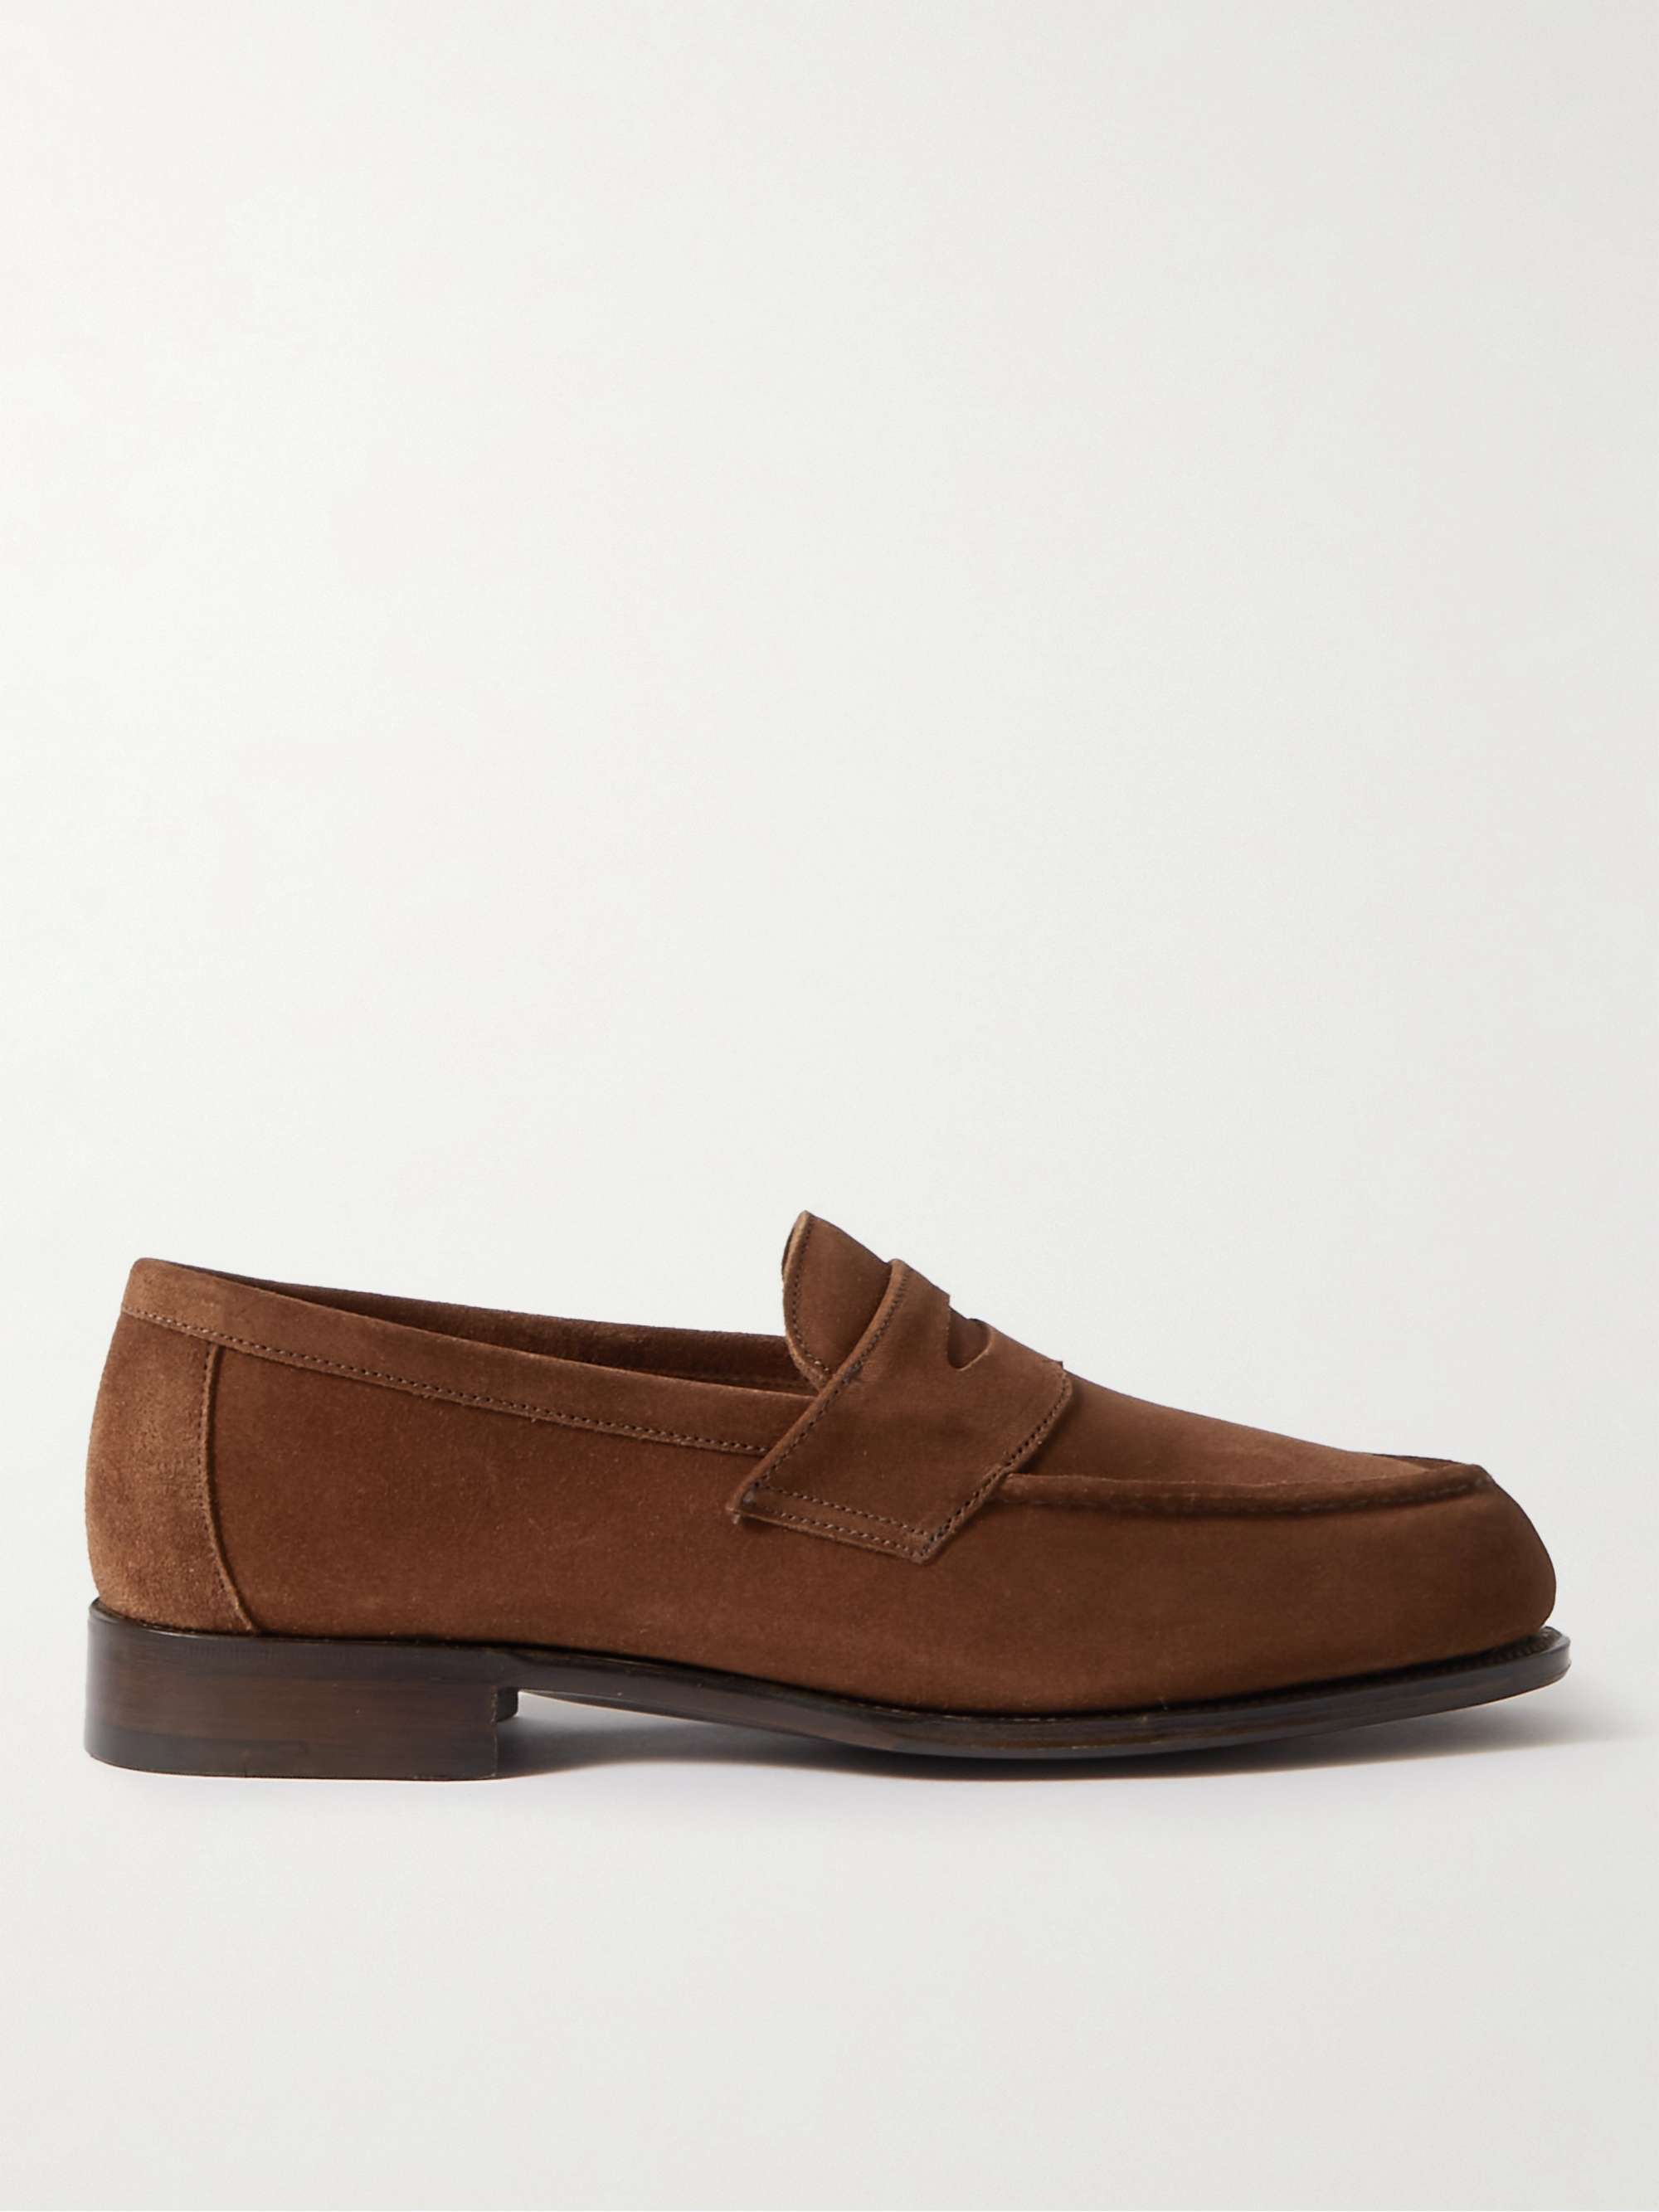 GEORGE CLEVERLEY Cannes Suede Penny Loafers